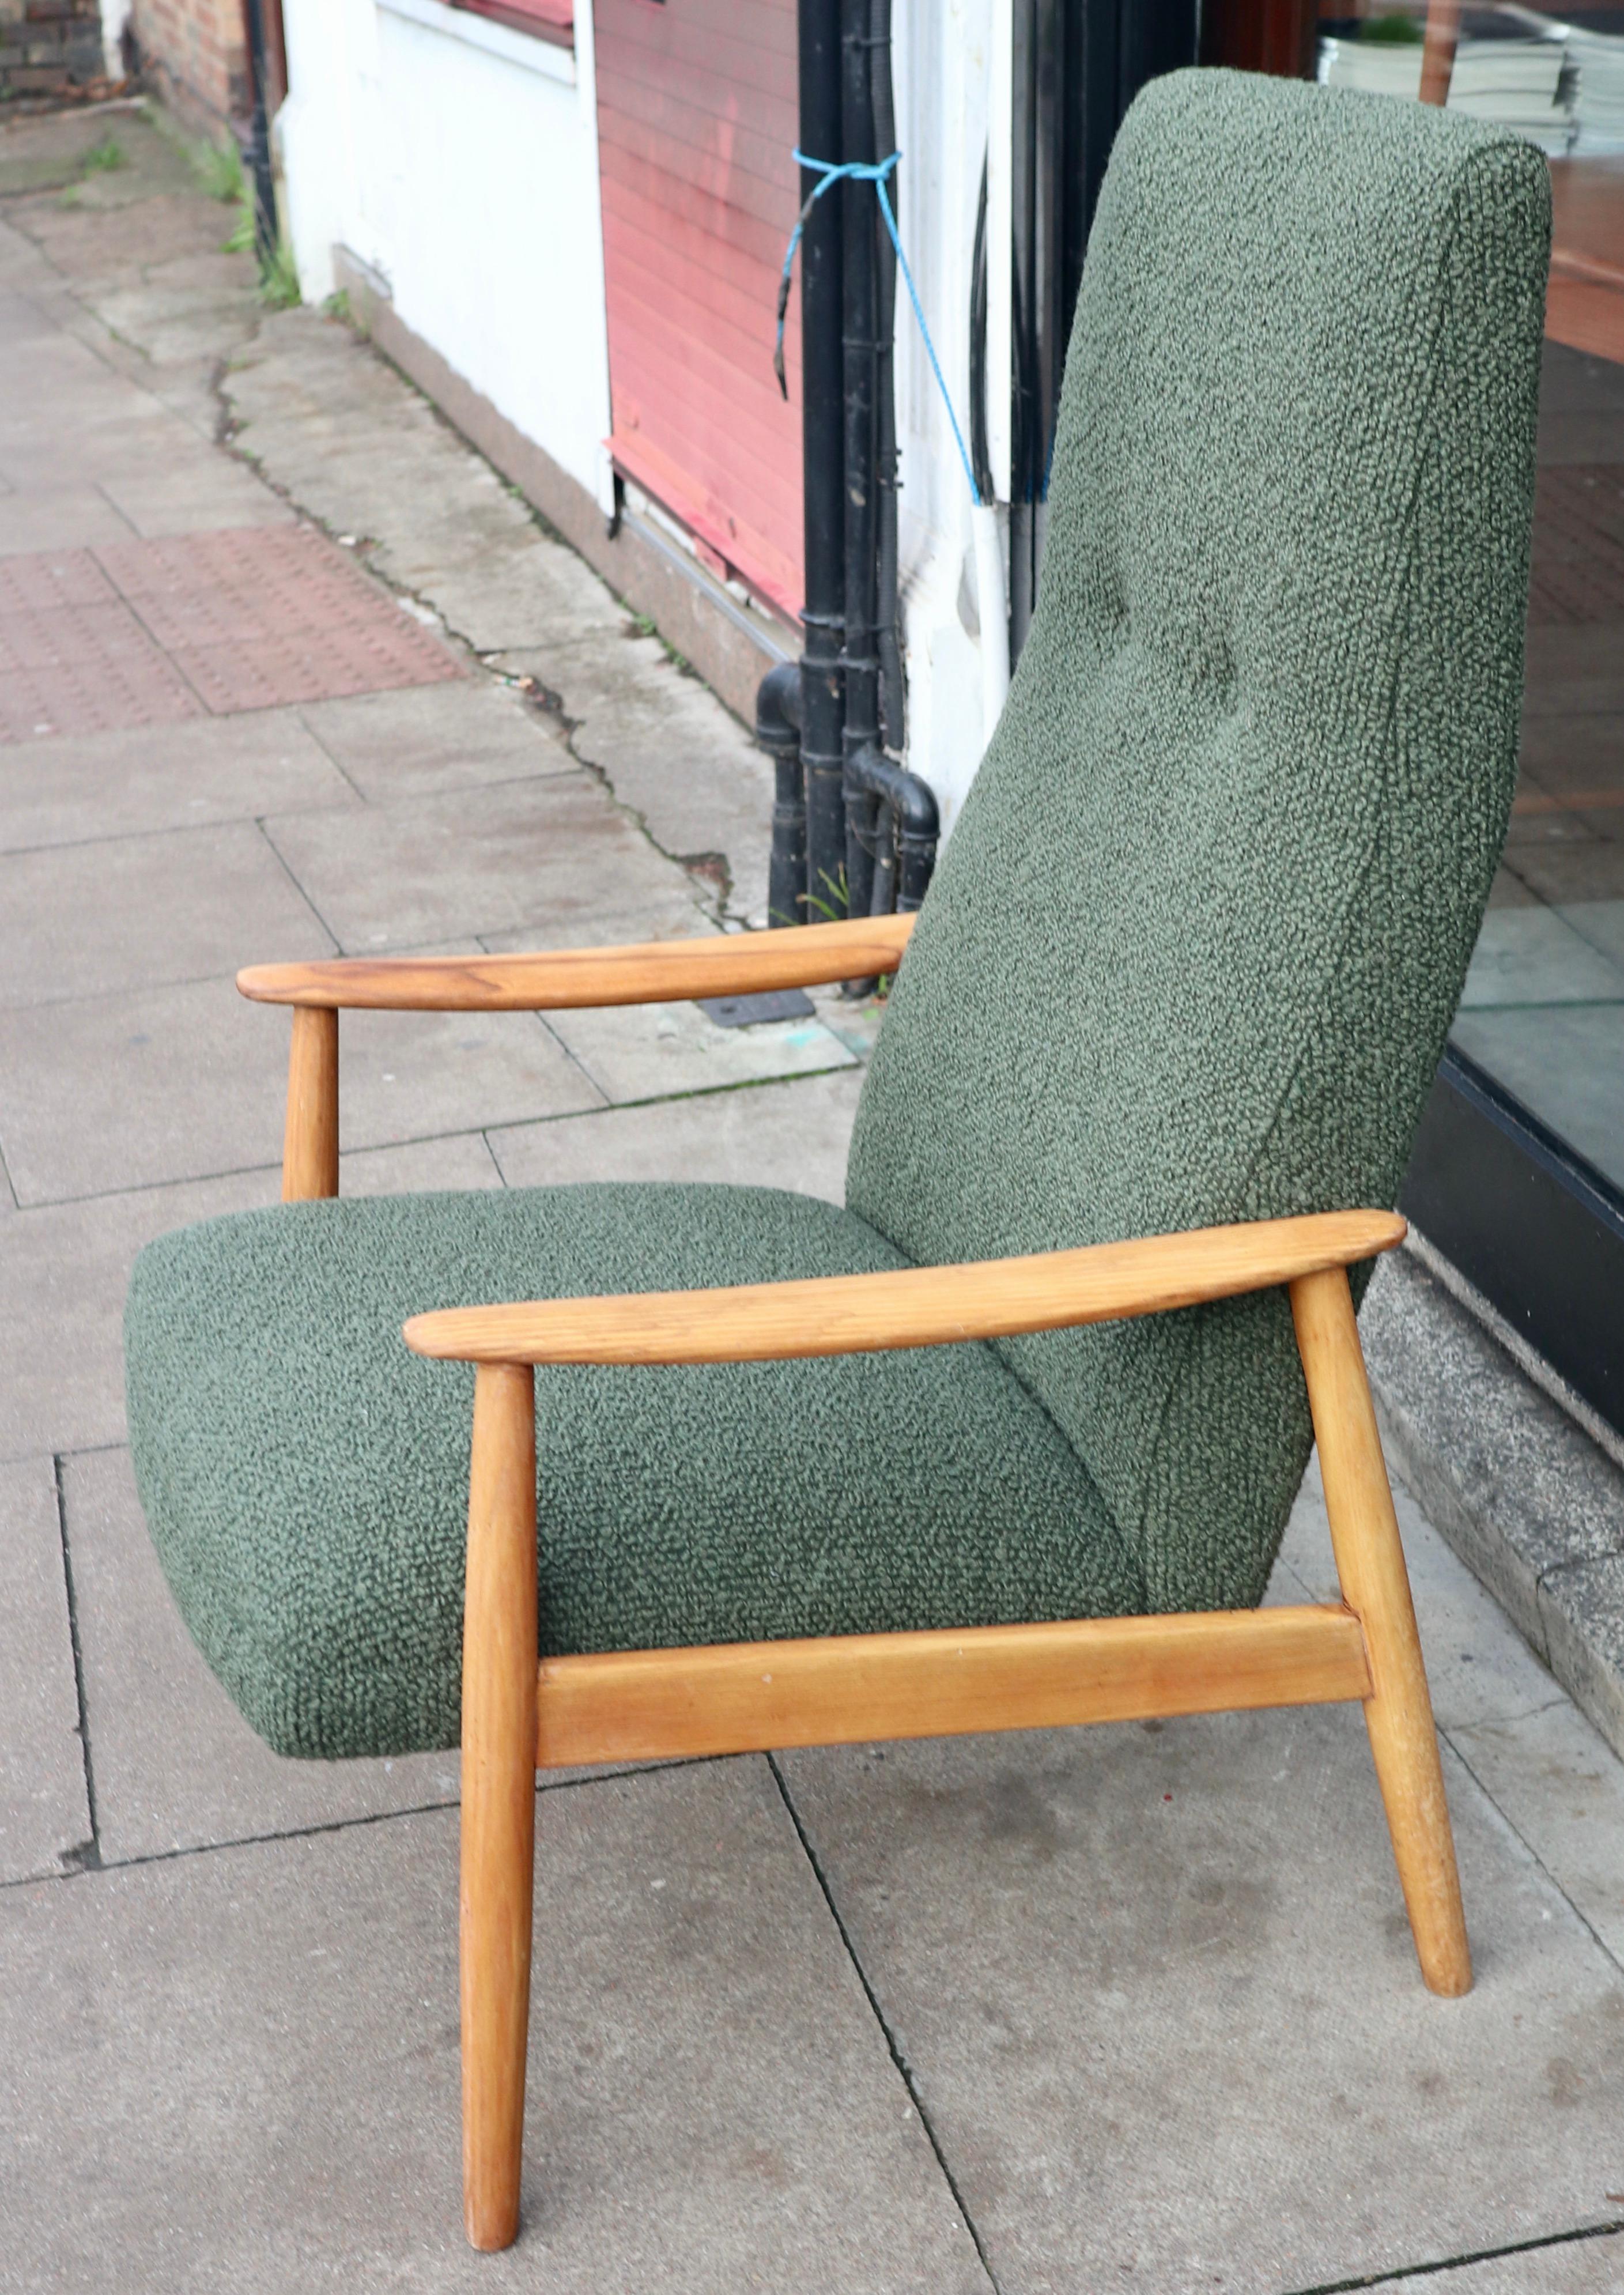 Vintage 1960s Danish high back lounge chair upholstered in moss green coloured boucle textile.  The chair has light coloured Elmwood arms that contrast  with the dark hue of the green fabric. All of the woodwork has been cleaned and refurbished,